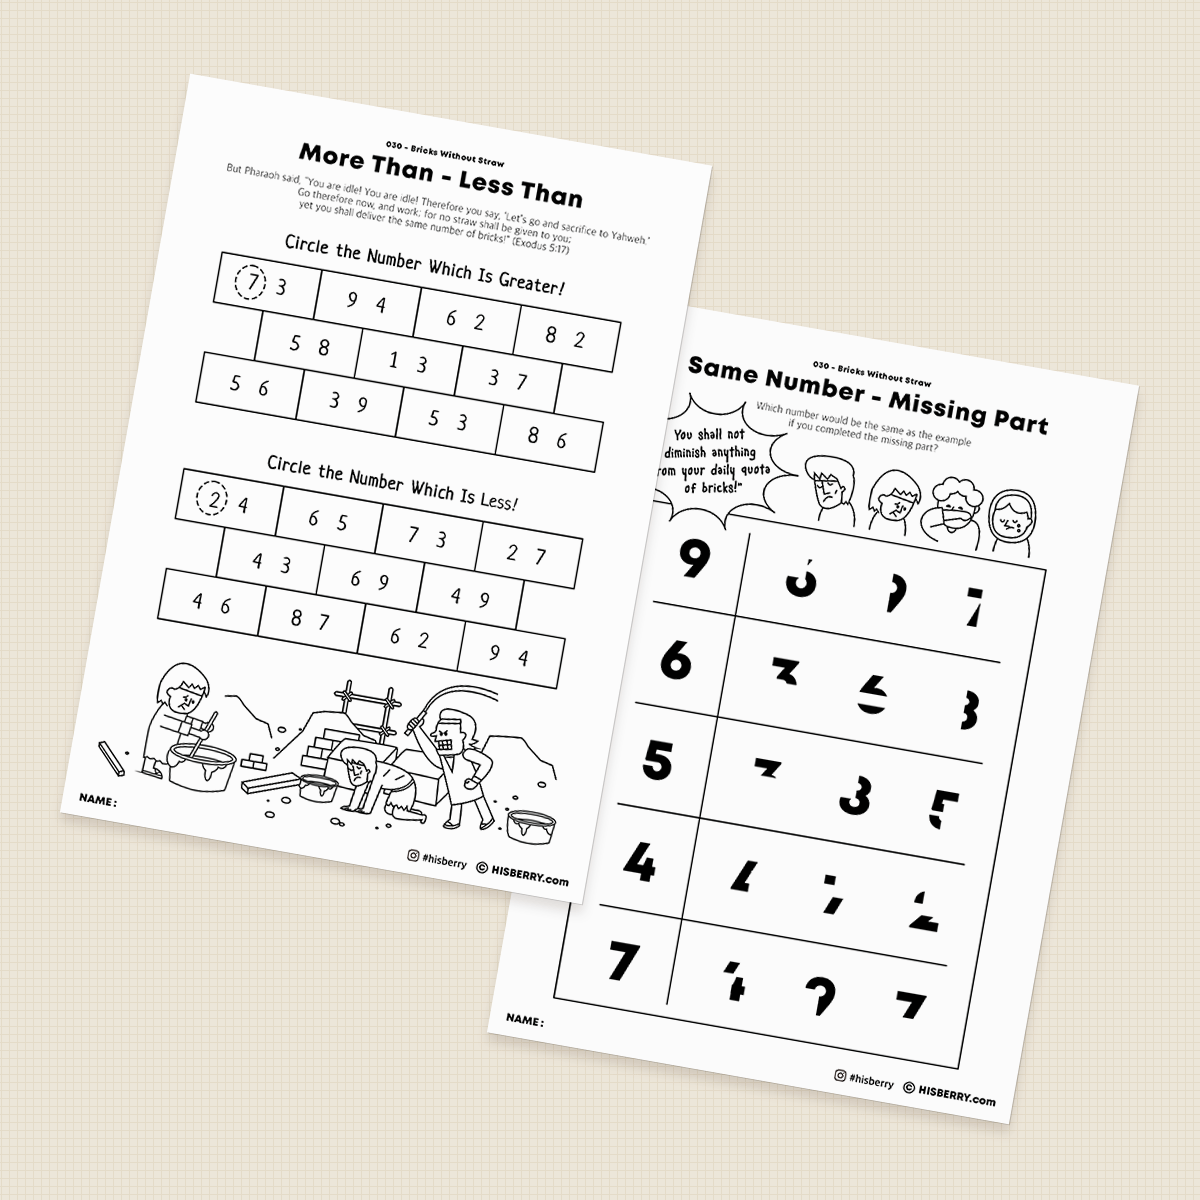 Bricks Without Straw - Activity Worksheets